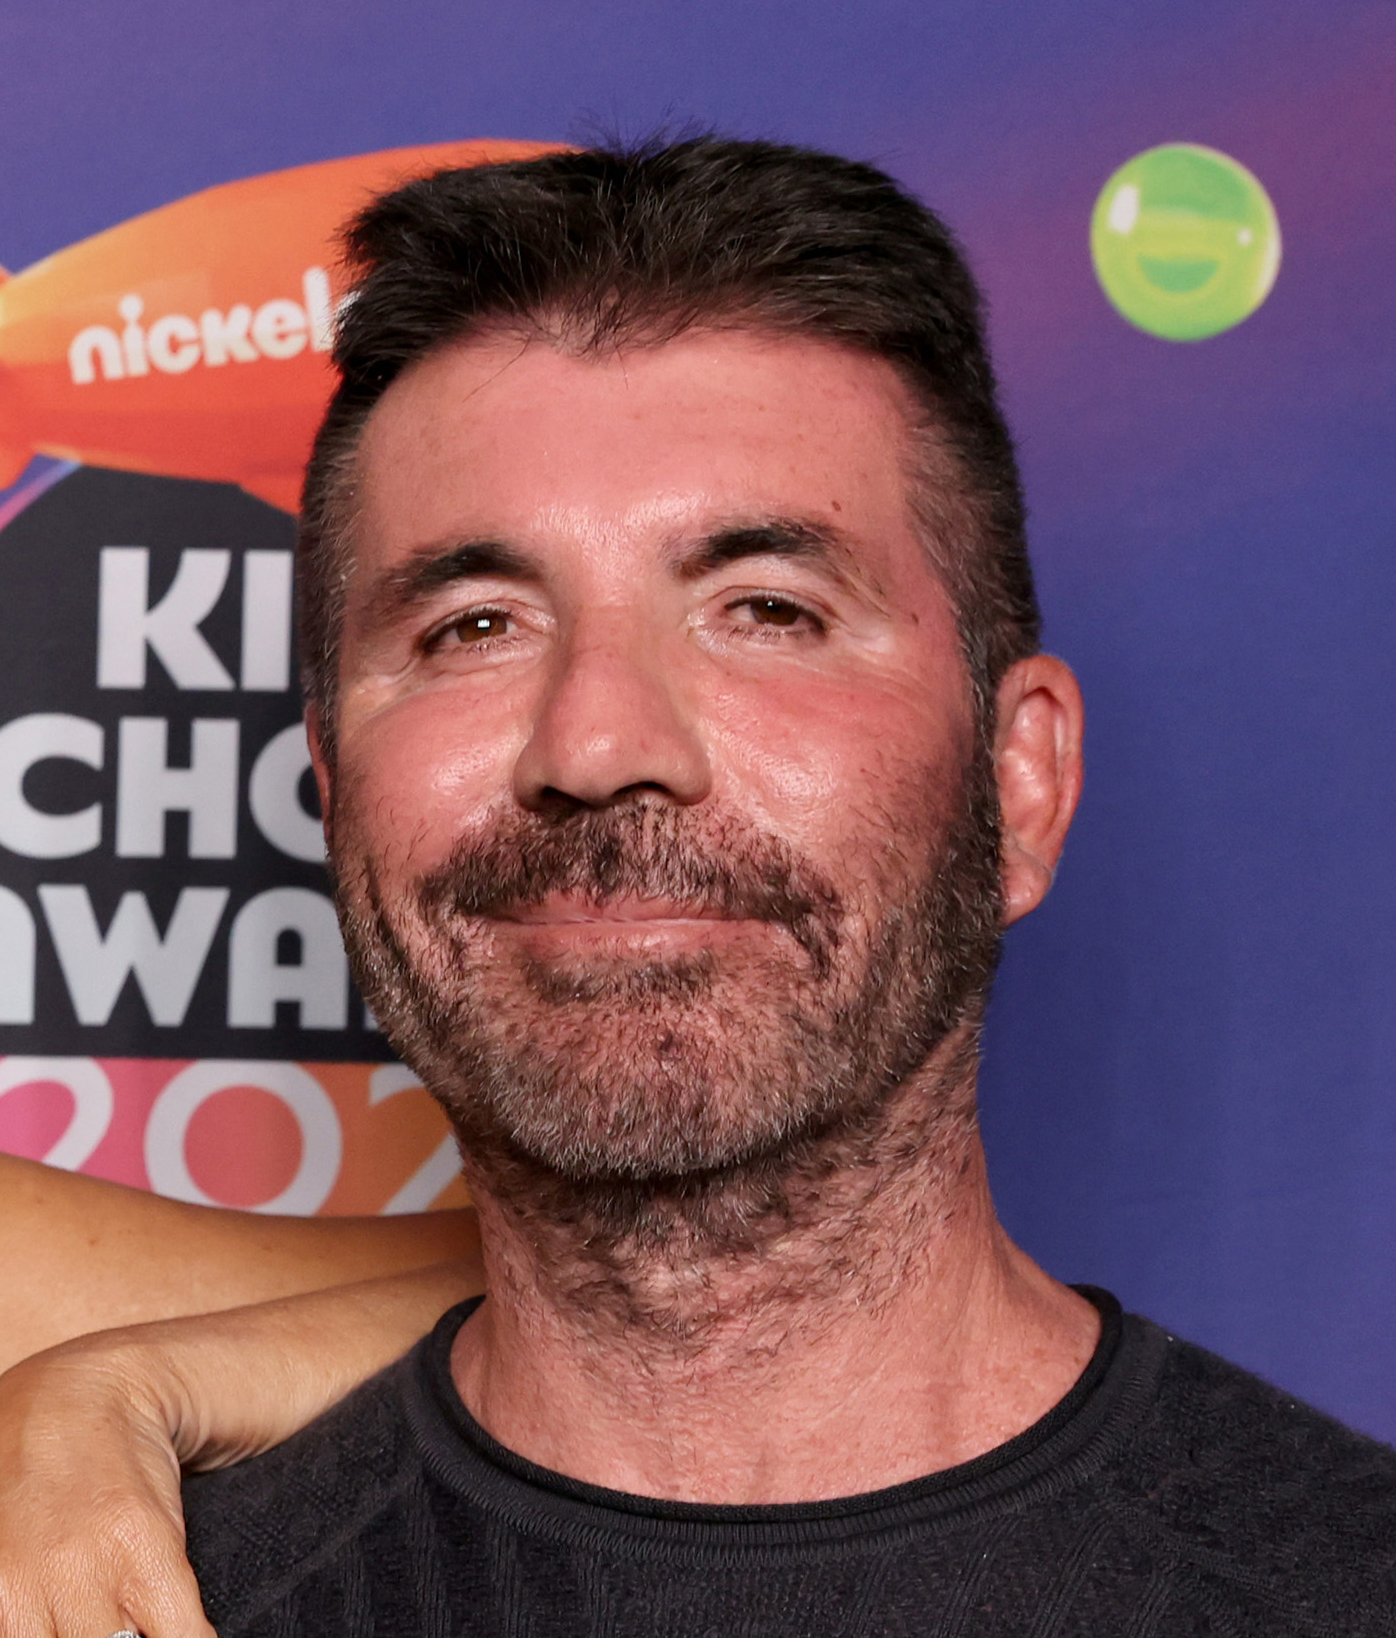 <p><span>In April 2022, <a href="https://www.wonderwall.com/celebrity/profiles/overview/simon-cowell-1009.article">Simon Cowell</a> -- seen here the same month -- told <a href="https://www.thesun.co.uk/tvandshowbiz/18218907/simon-cowell-bike-feared-walk/">The Sun</a> that he's done using injectables after realizing he looked "like something out of a horror film." Simon further confessed, "There was a stage where I might have gone a bit too far. I saw a picture of me from 'before' the other day, and didn't recognize it as me, first of all." His face sent son Eric into "hysterics," he added, which made him realize that "enough was enough." According to Simon, "There is no filler in my face at all now. Zero."</span></p>